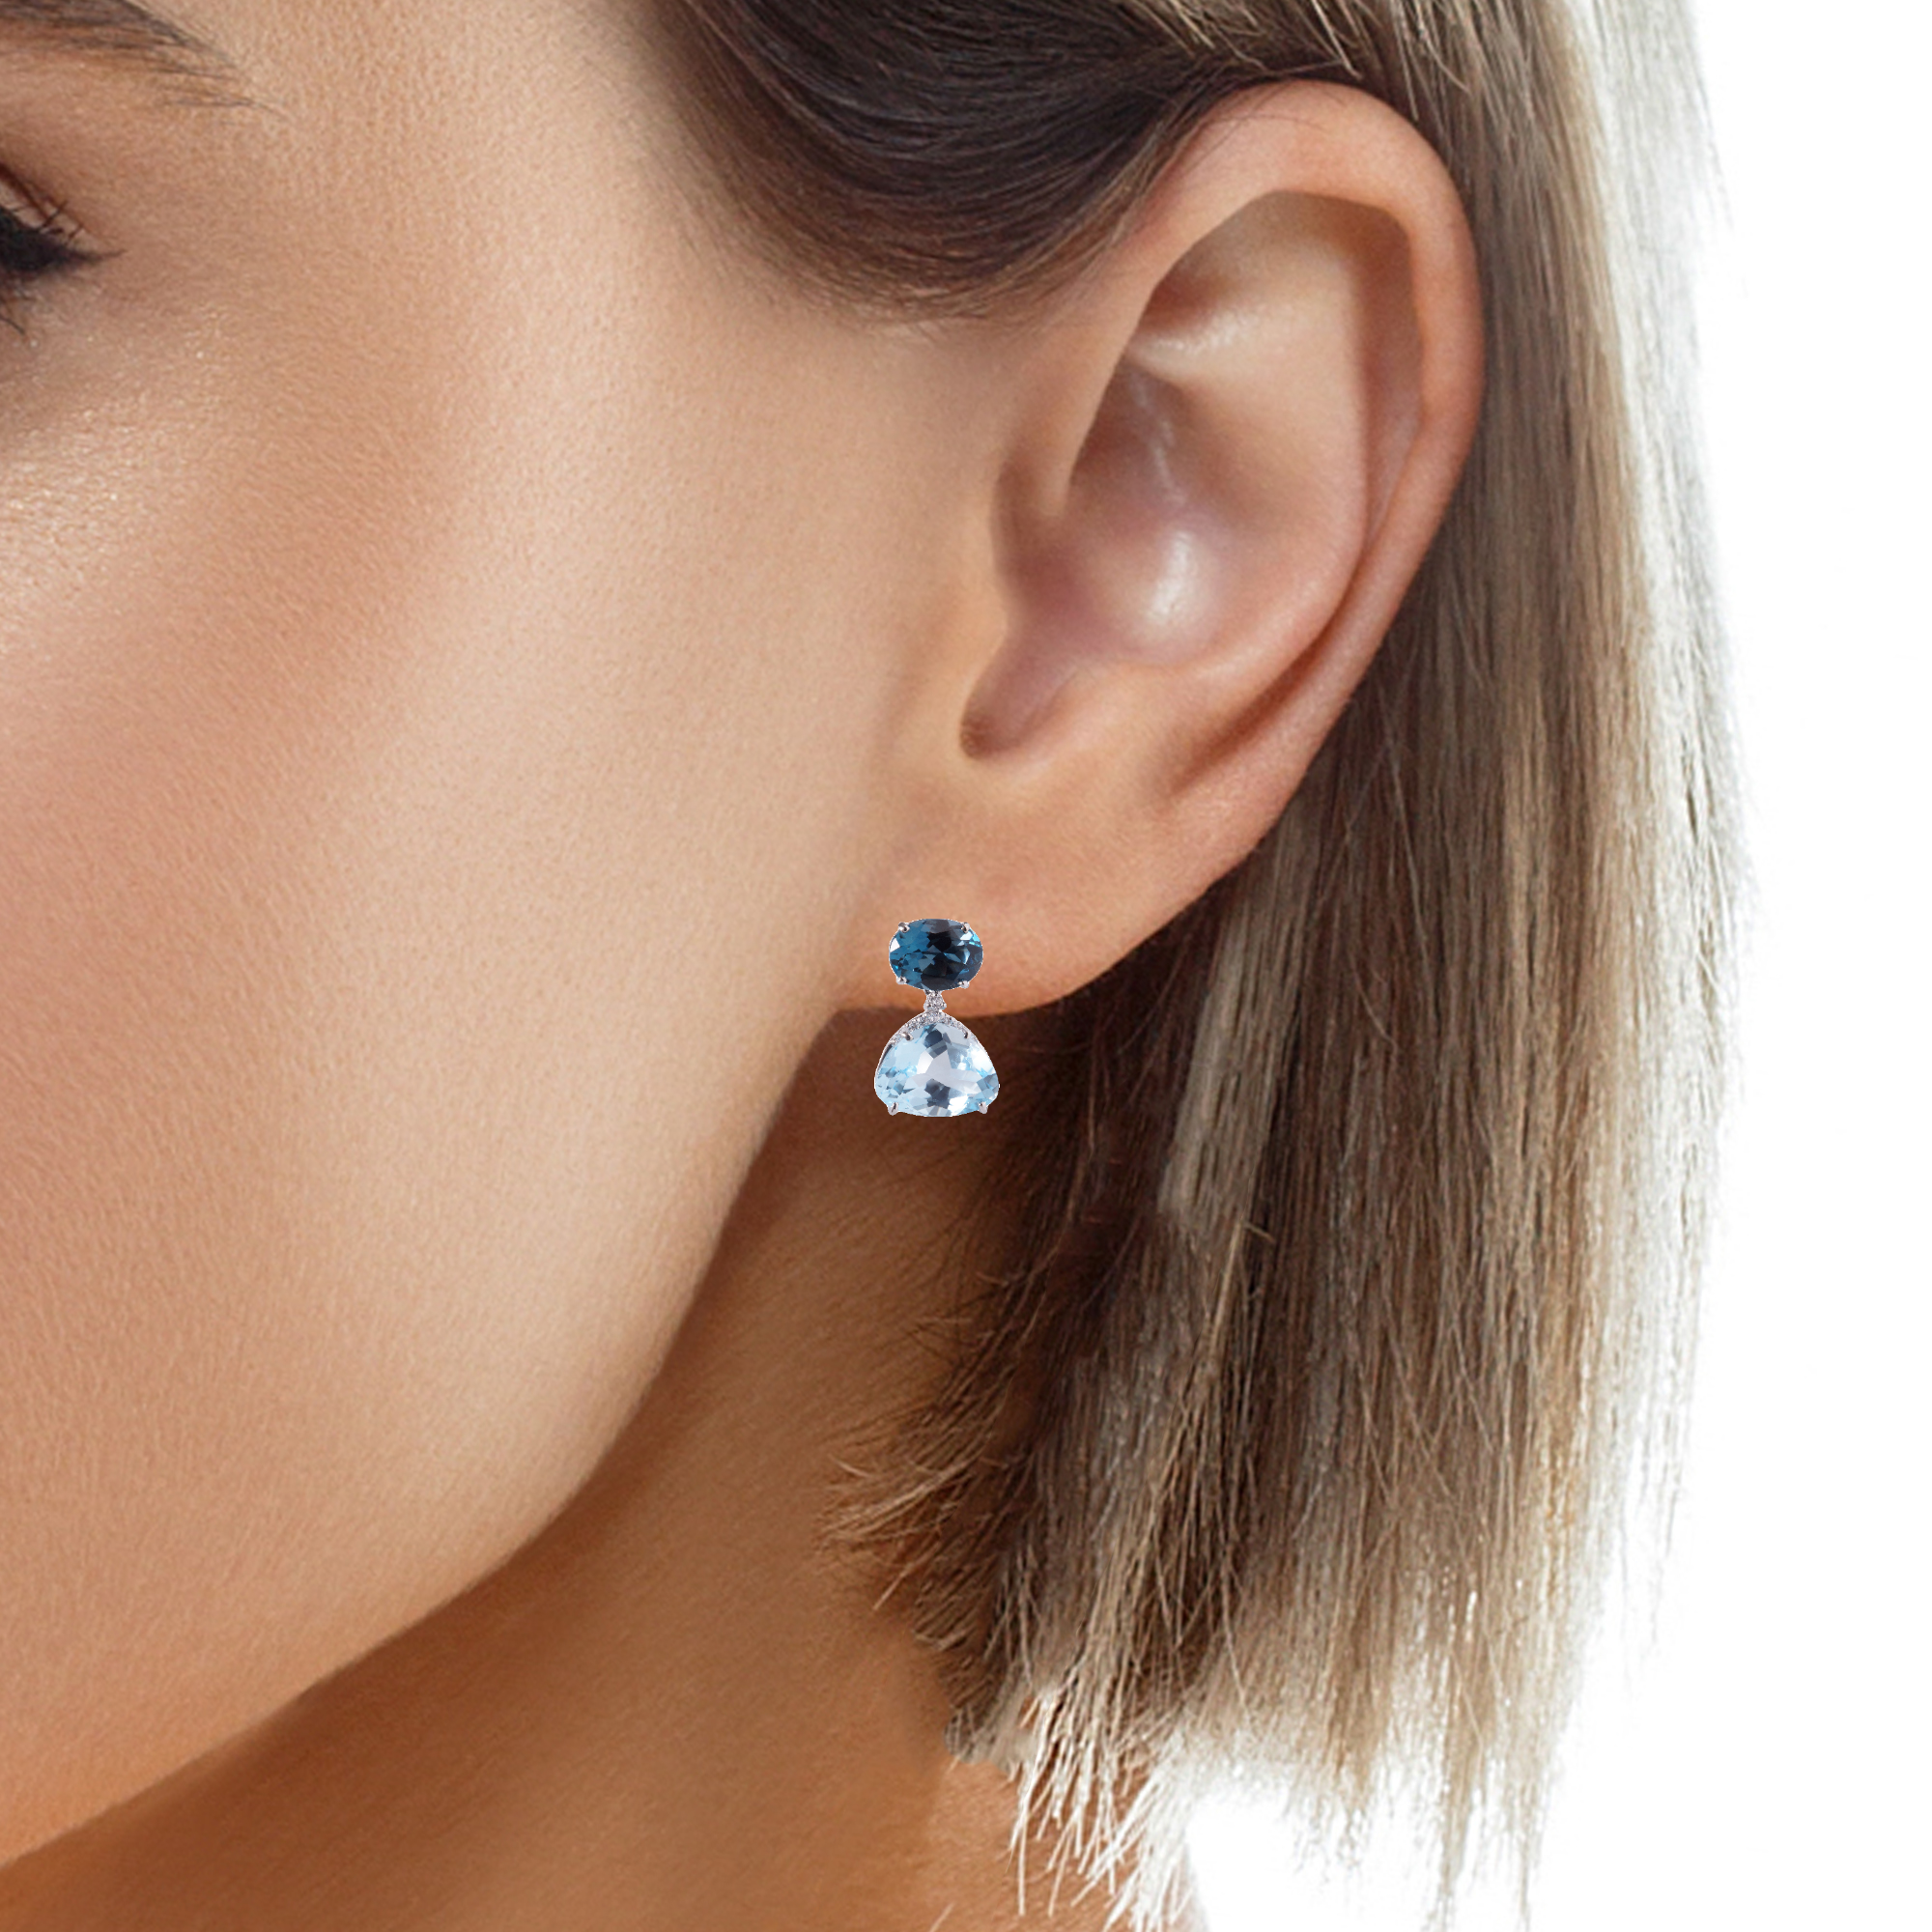 Our Vianna Brasil collection features London Blue Topaz (12.0 cts) and round Diamond (0.11 cts) Drop Earrings in 18K White Gold, measuring 19.88 mm long x 12.00 mm wide with secure friction backing.